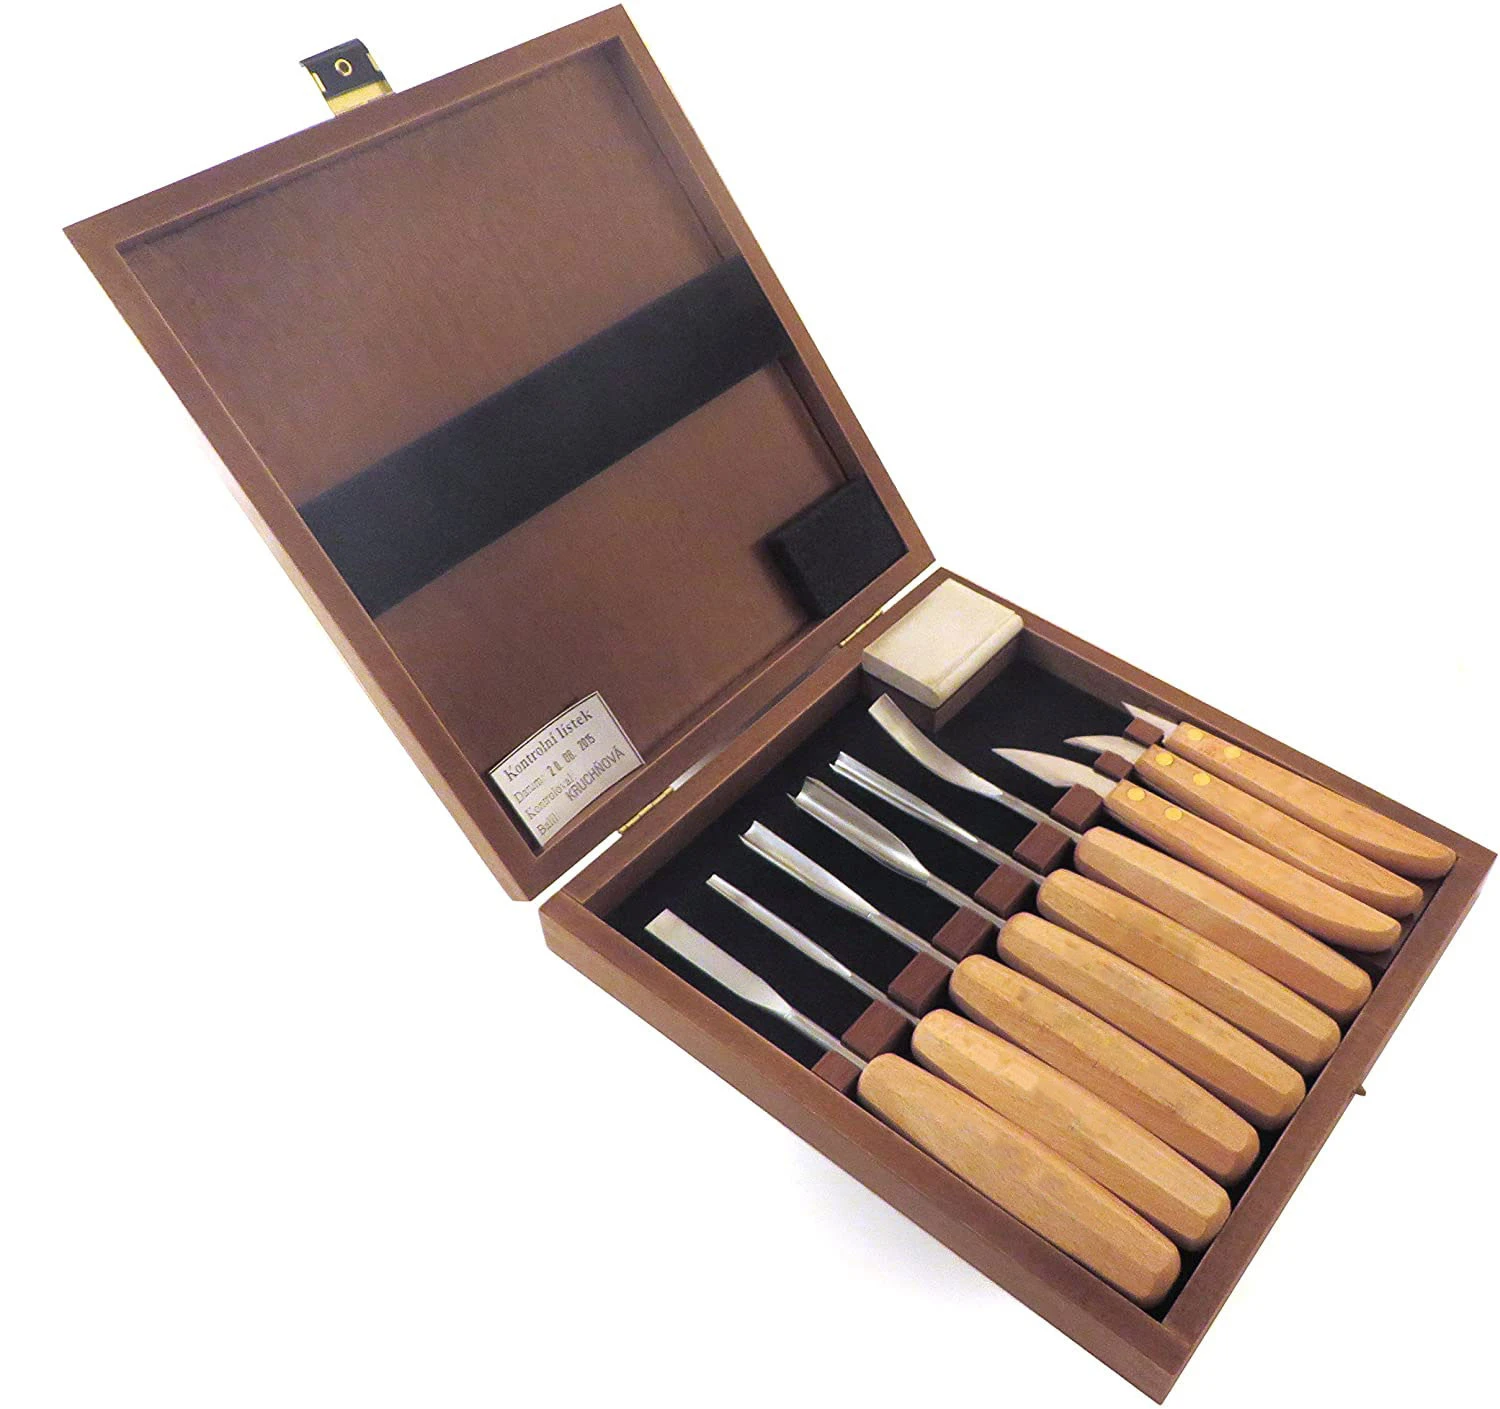 Vibratite Wood Carving Kit, Carving Knives and Carving Chisels Set in Wooden Presentation Box/